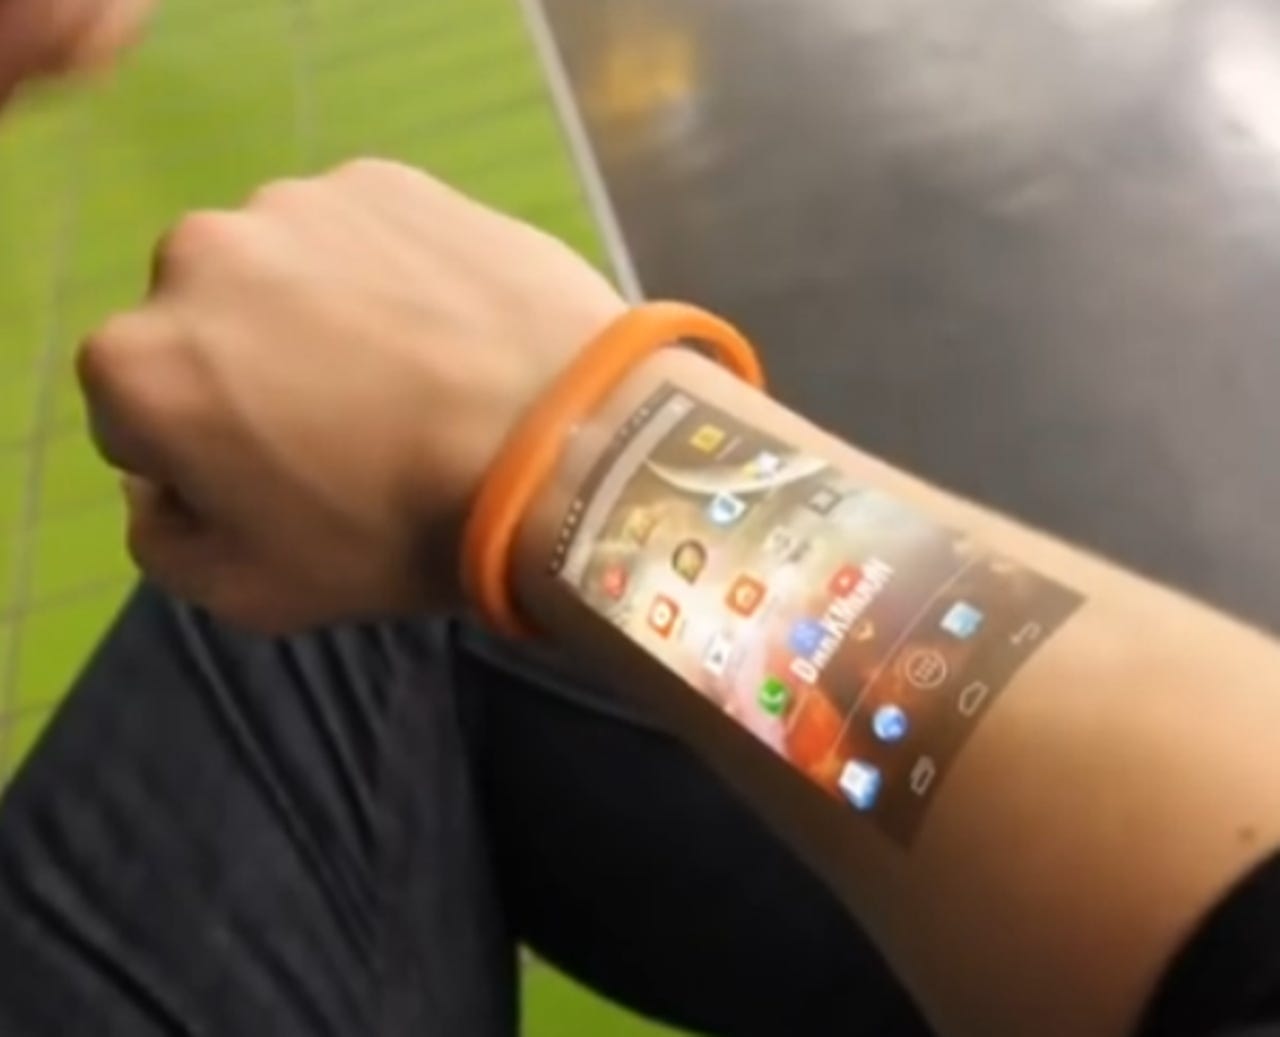 Cicret wearable aims to turn your skin into your tablet - but could this ever happen ZDNet